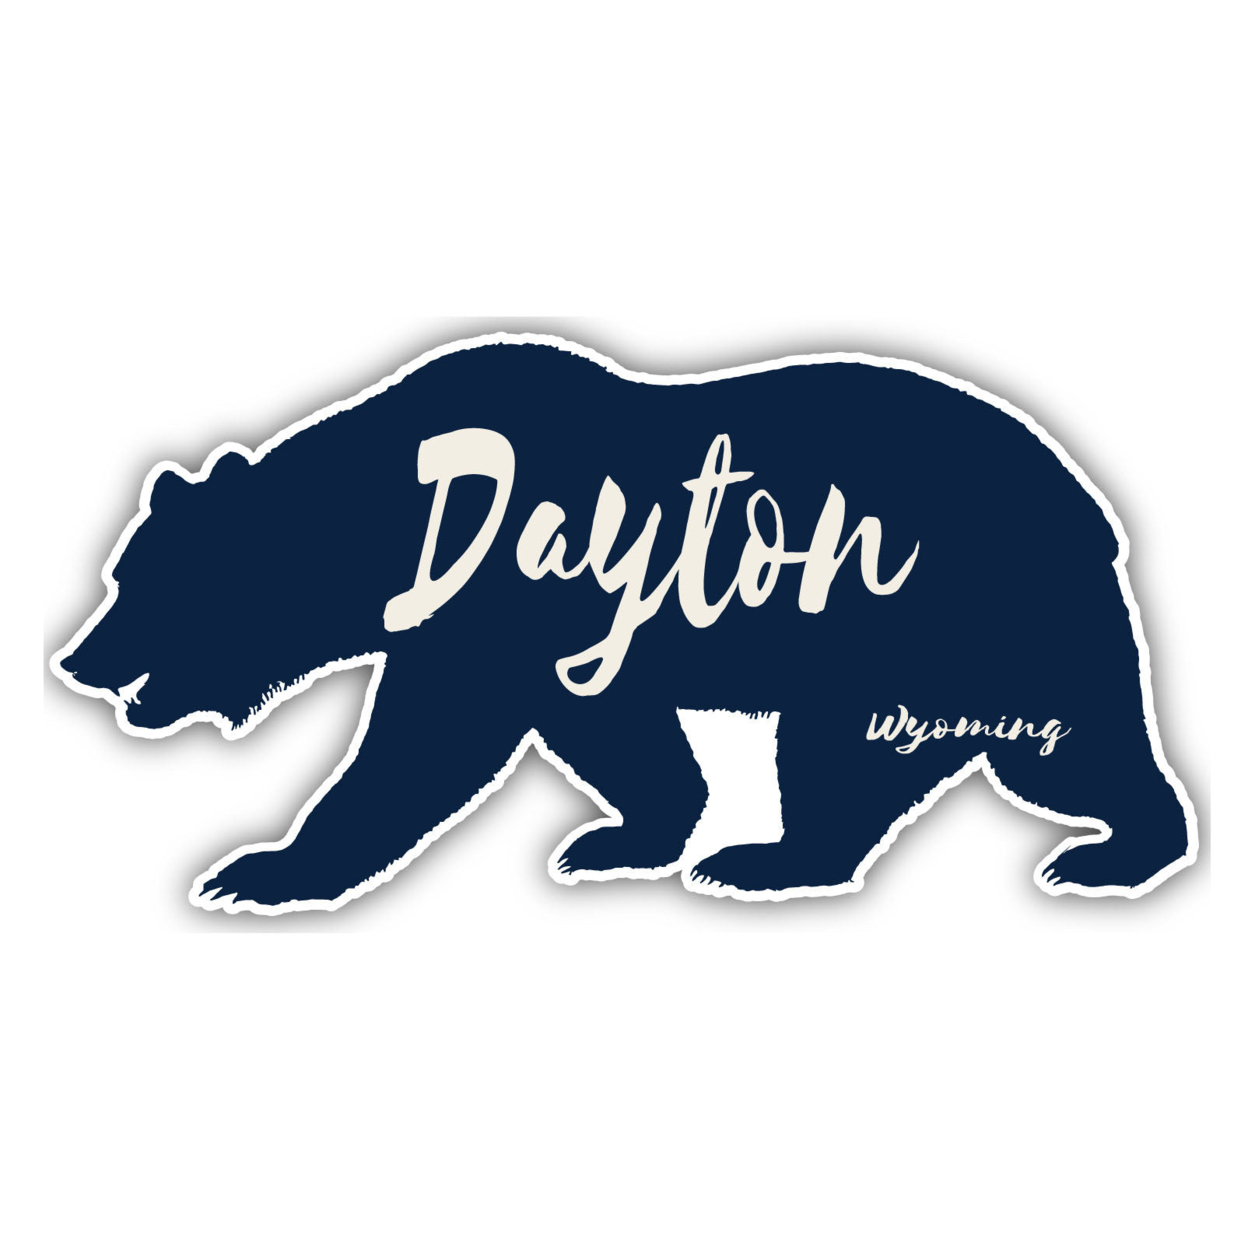 Dayton Wyoming Souvenir Decorative Stickers (Choose Theme And Size) - 4-Pack, 4-Inch, Bear